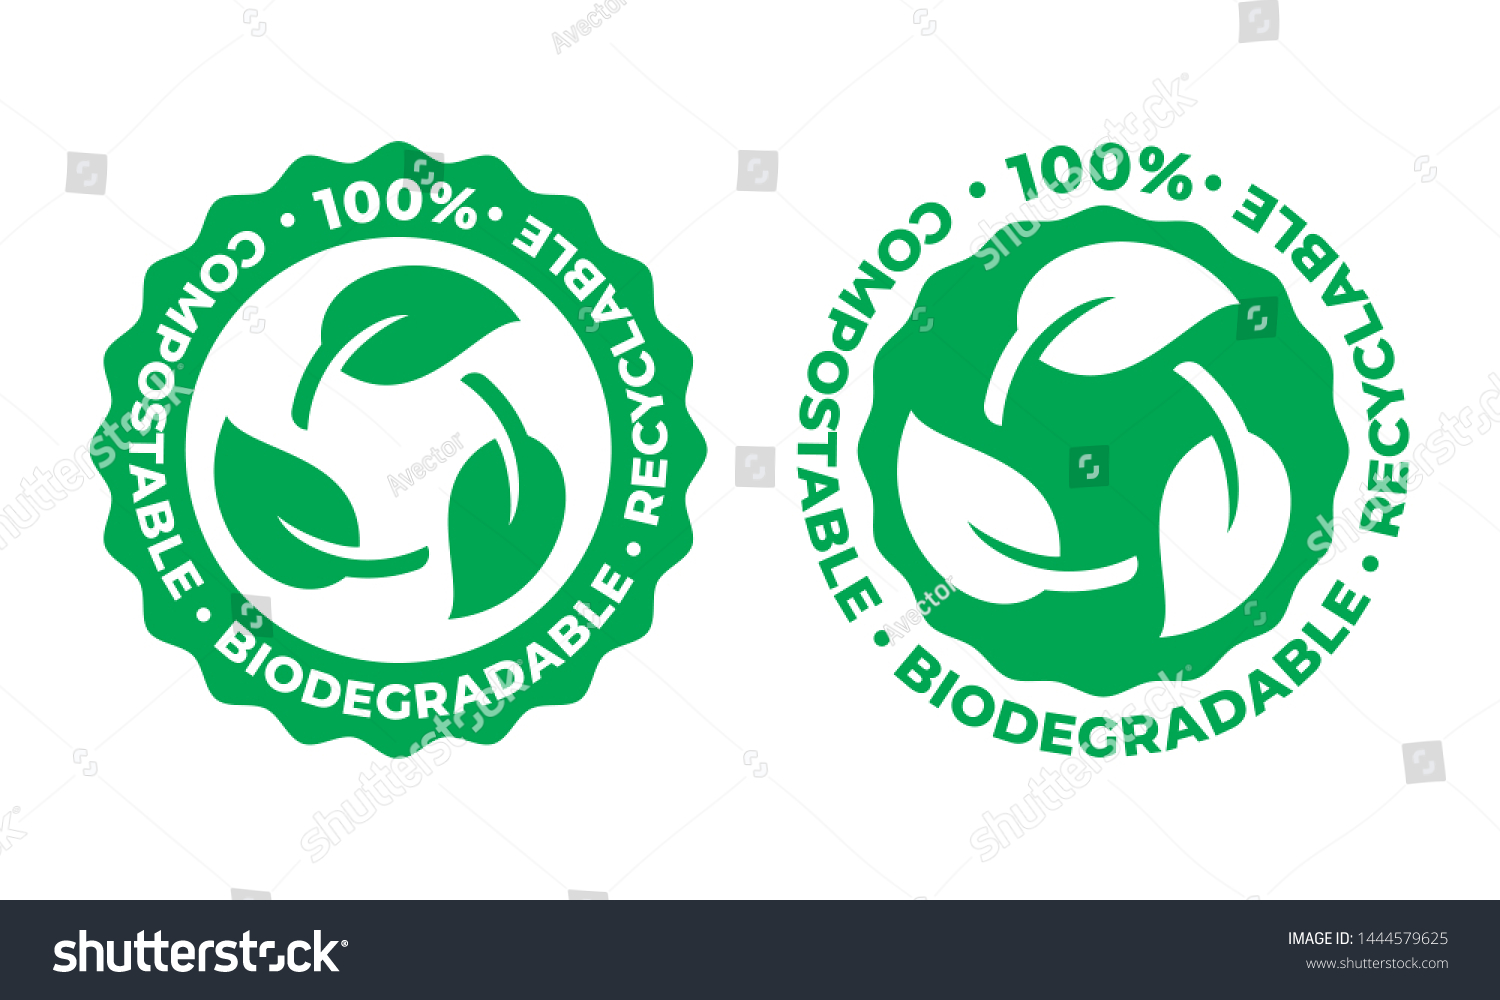 SVG of Biodegradable and compostable recyclable vector icon. 100 percent bio recycling package green leaf logo svg